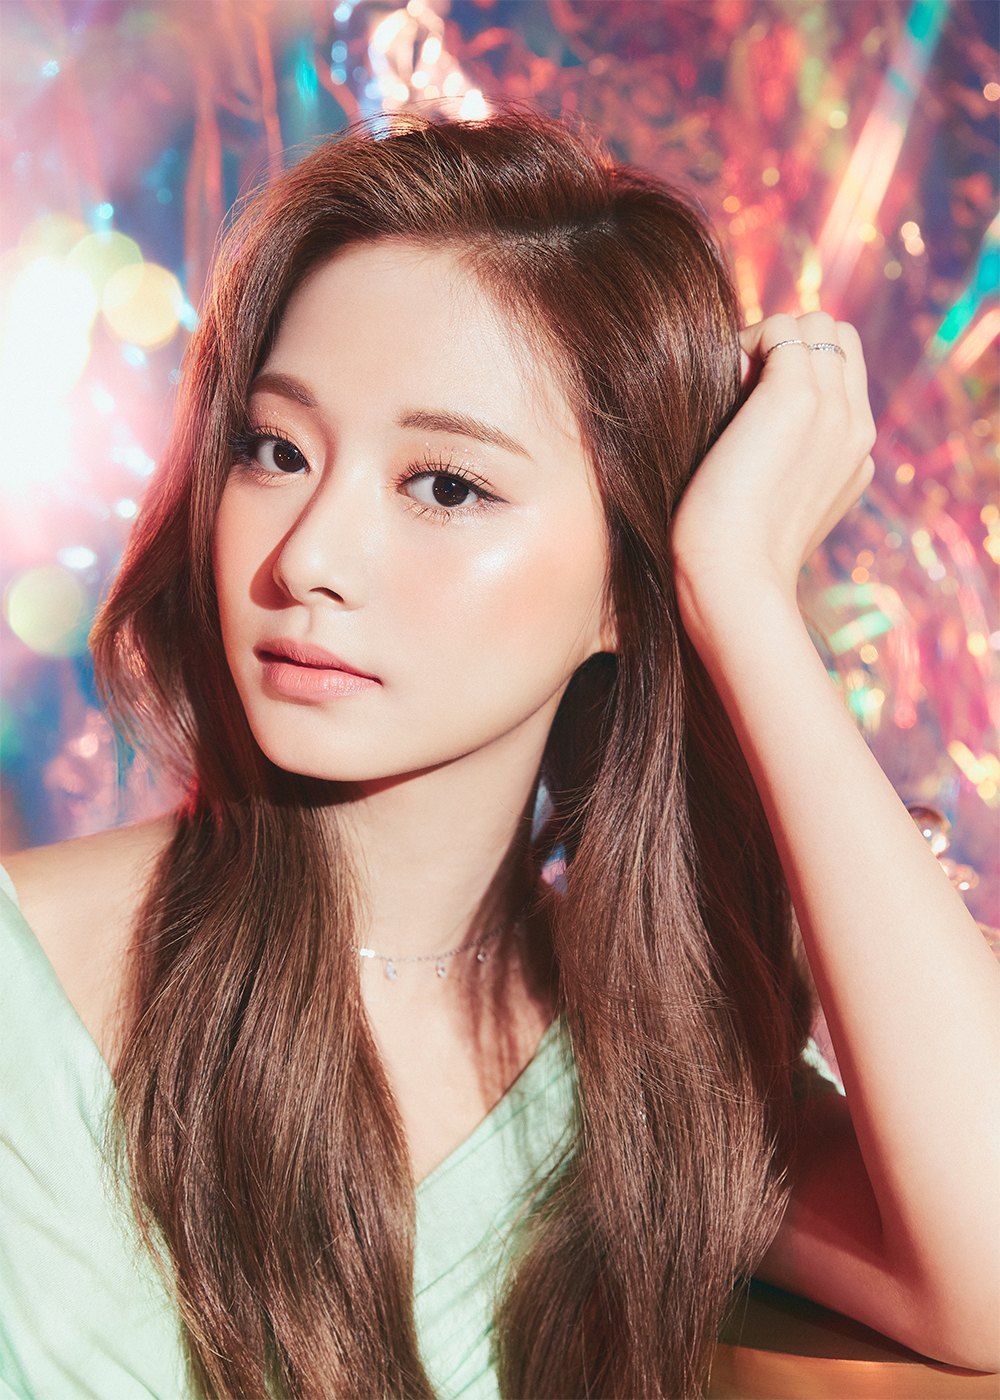 Full Biography and Profile of Tzuyu, the Maknae of TWICE from Taiwan